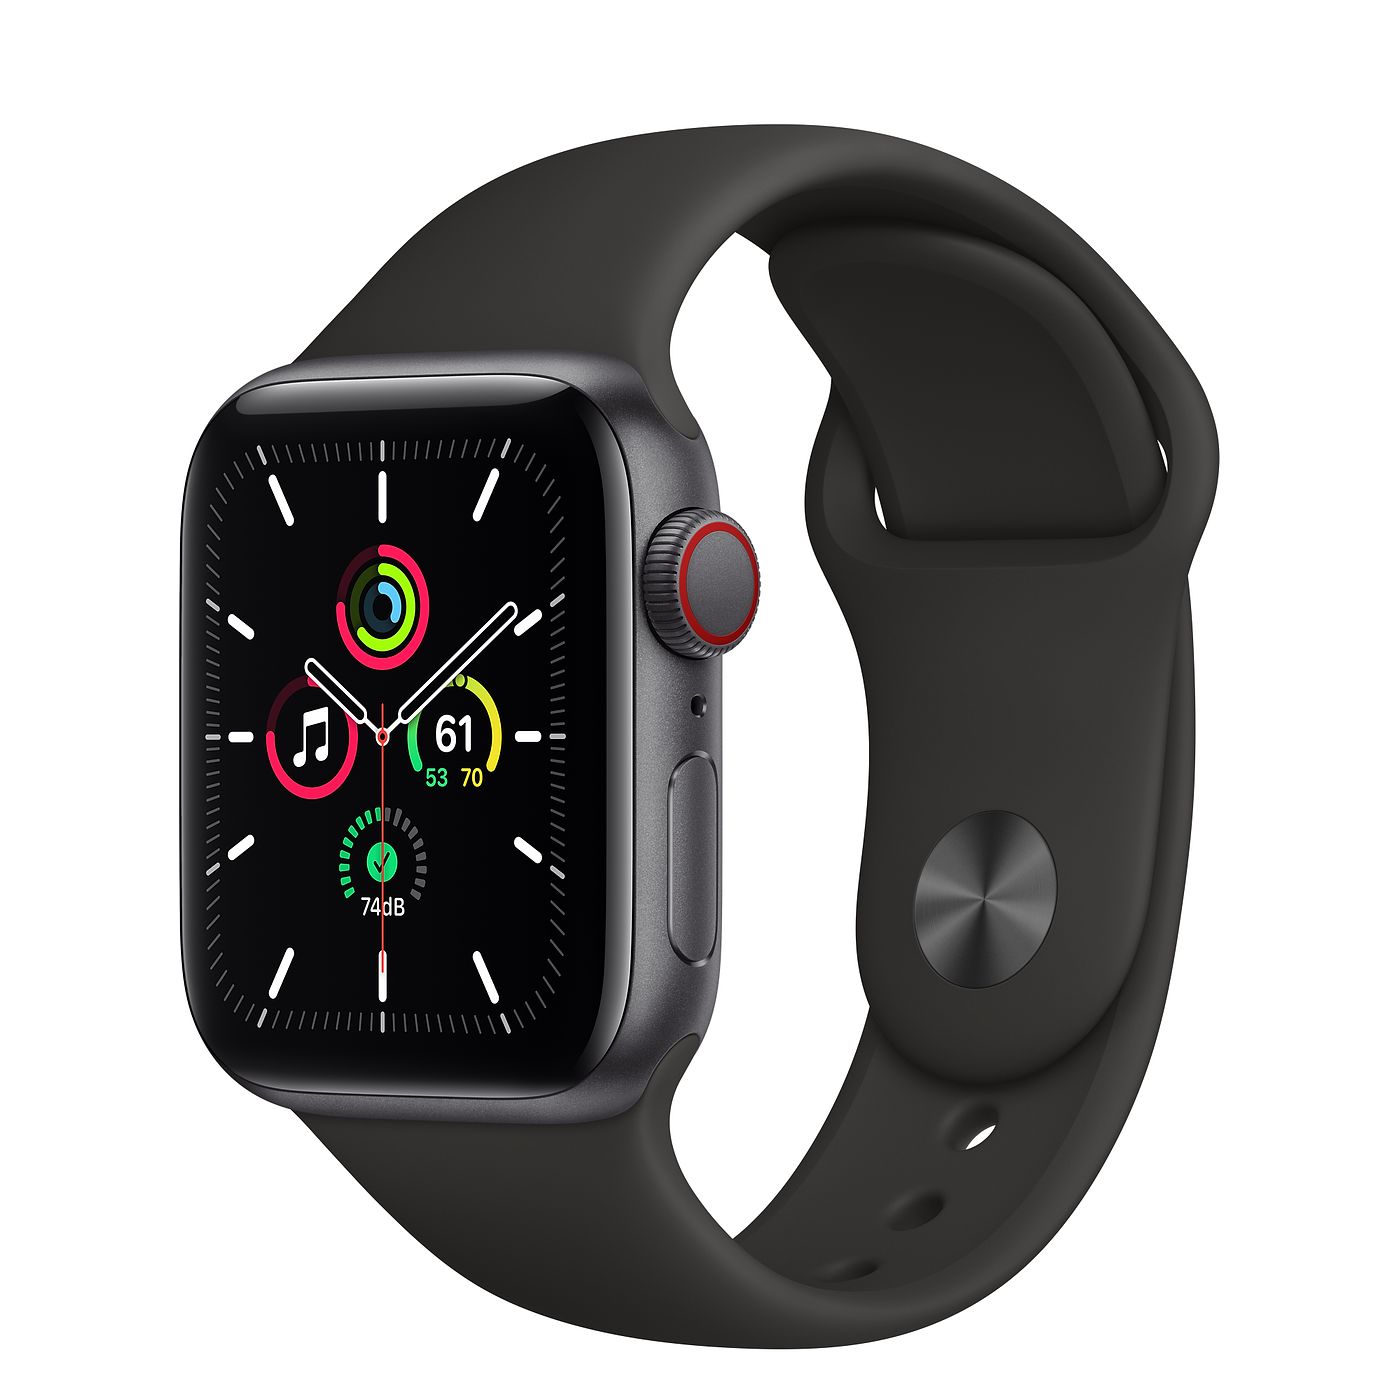 Apple Watch SE GPS + Cellular, 40mm Aluminum Case with Sport Band